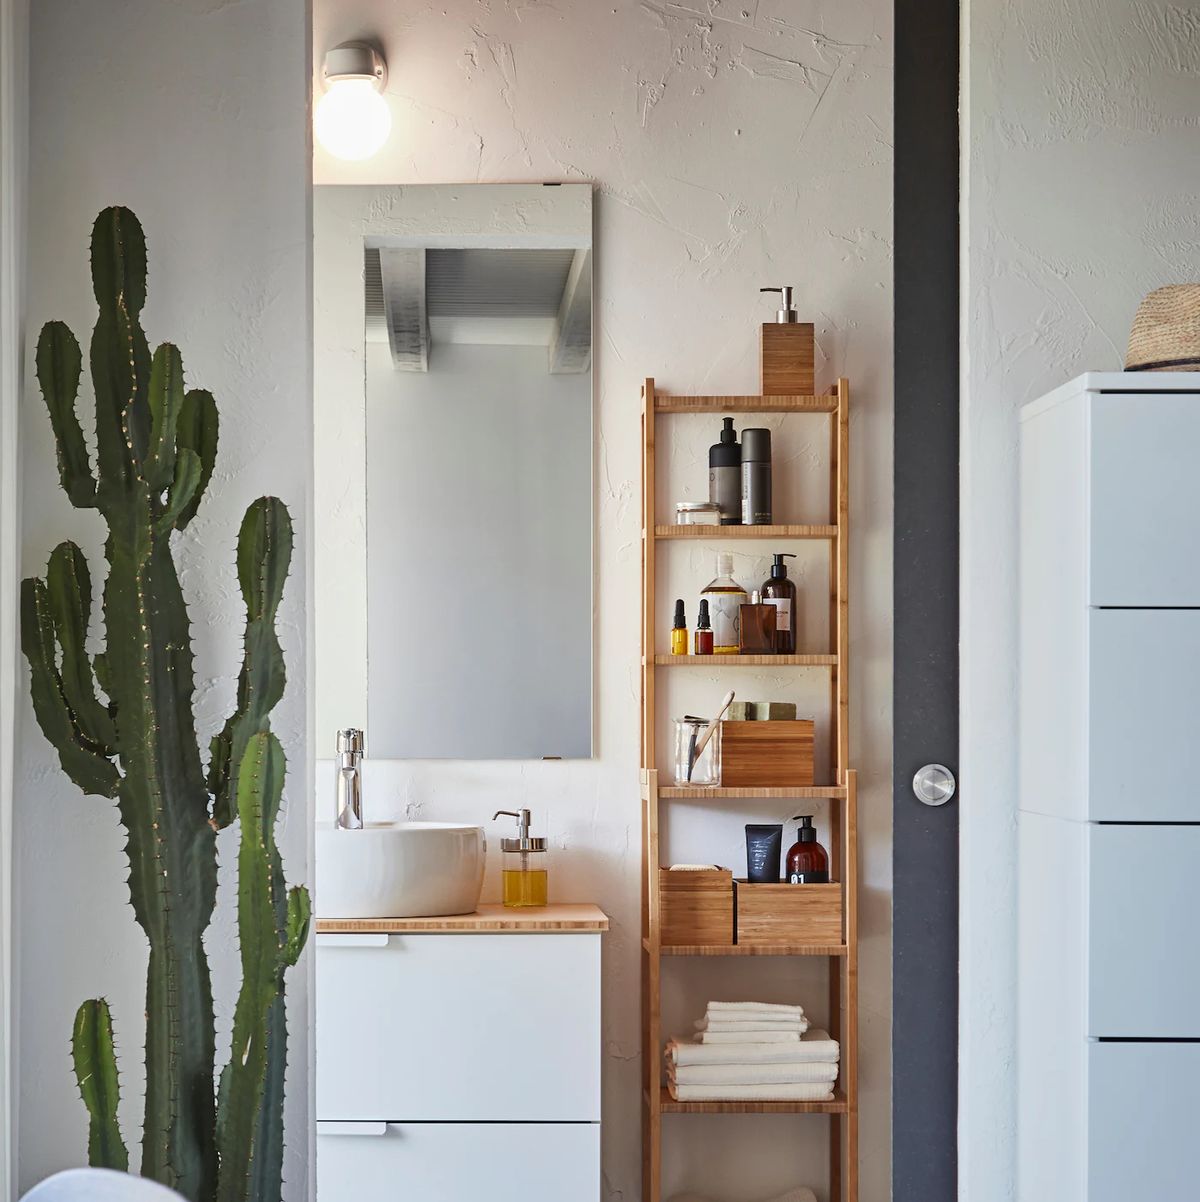 35 Small Bathroom Storage Ideas to Conceal & Organize Clutter